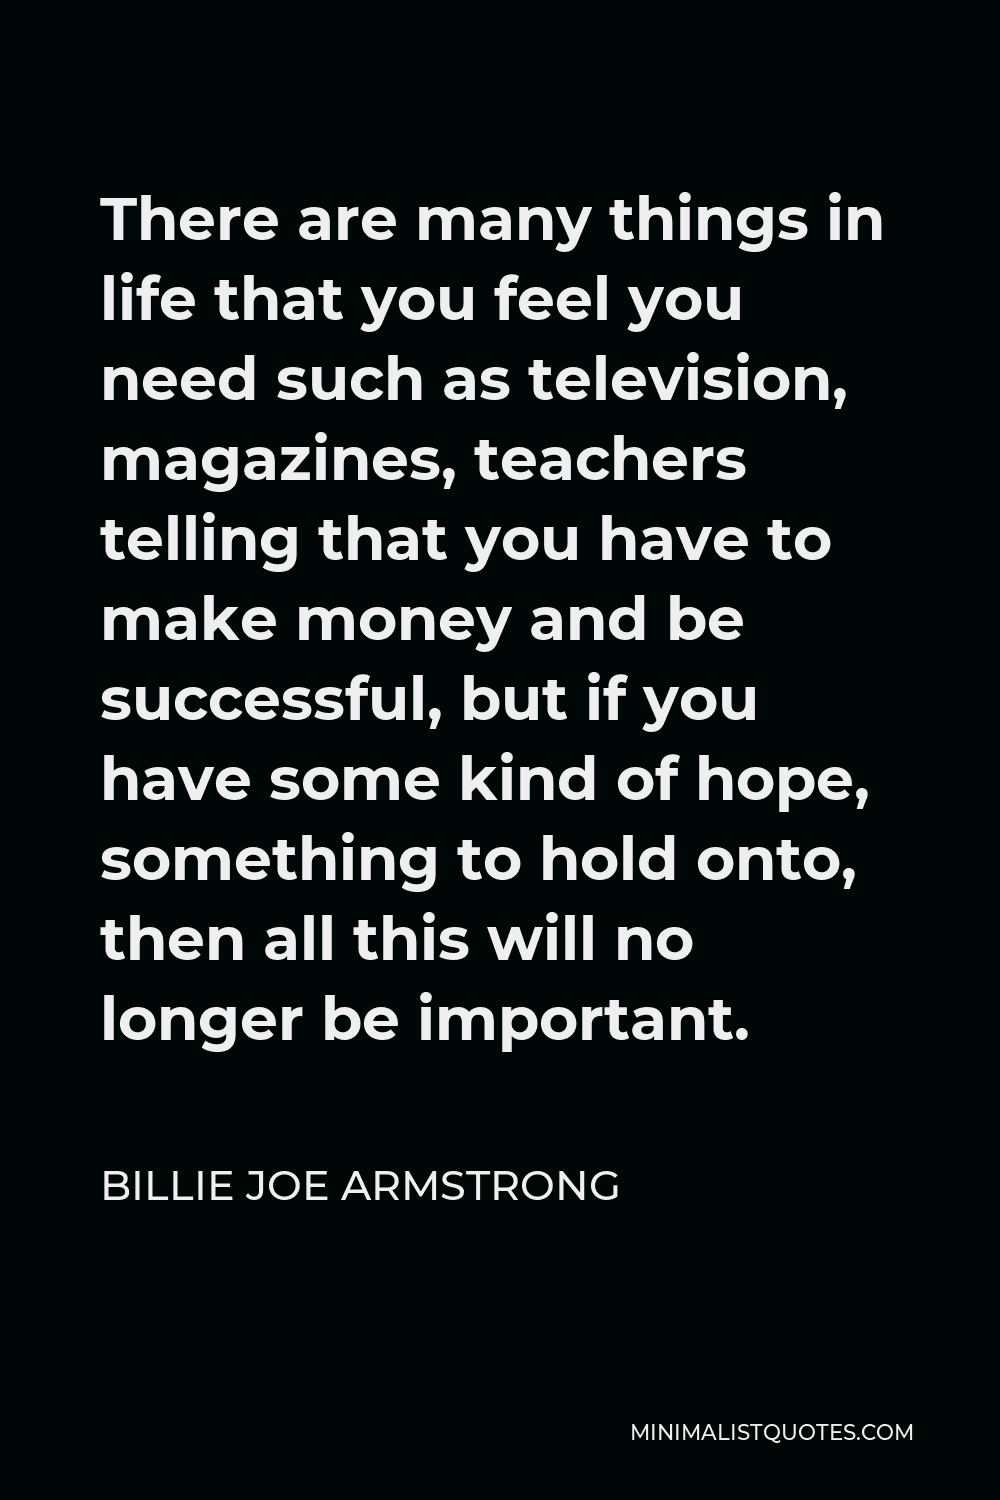 Billie Joe Armstrong Quote - There are many things in life that you feel you need such as television, magazines, teachers telling that you have to make money and be successful, but if you have some kind of hope, something to hold onto, then all this will no longer be important.